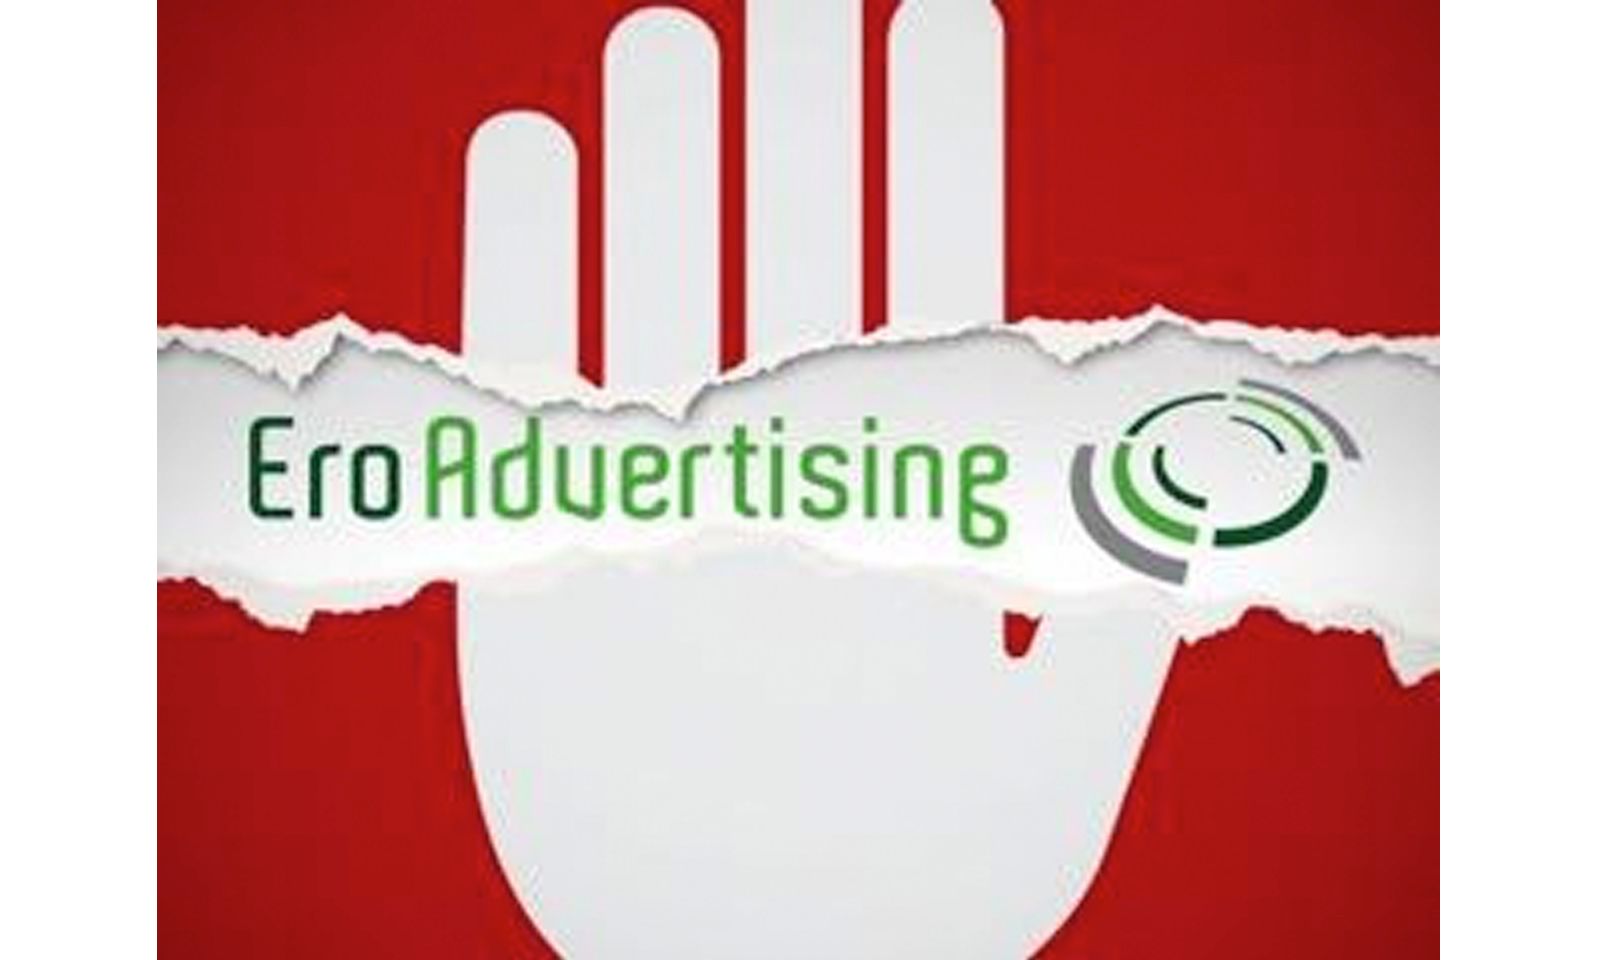 EroAdsController Tool Lets Publishers Experiment with Advanced Ad Delivery Methods